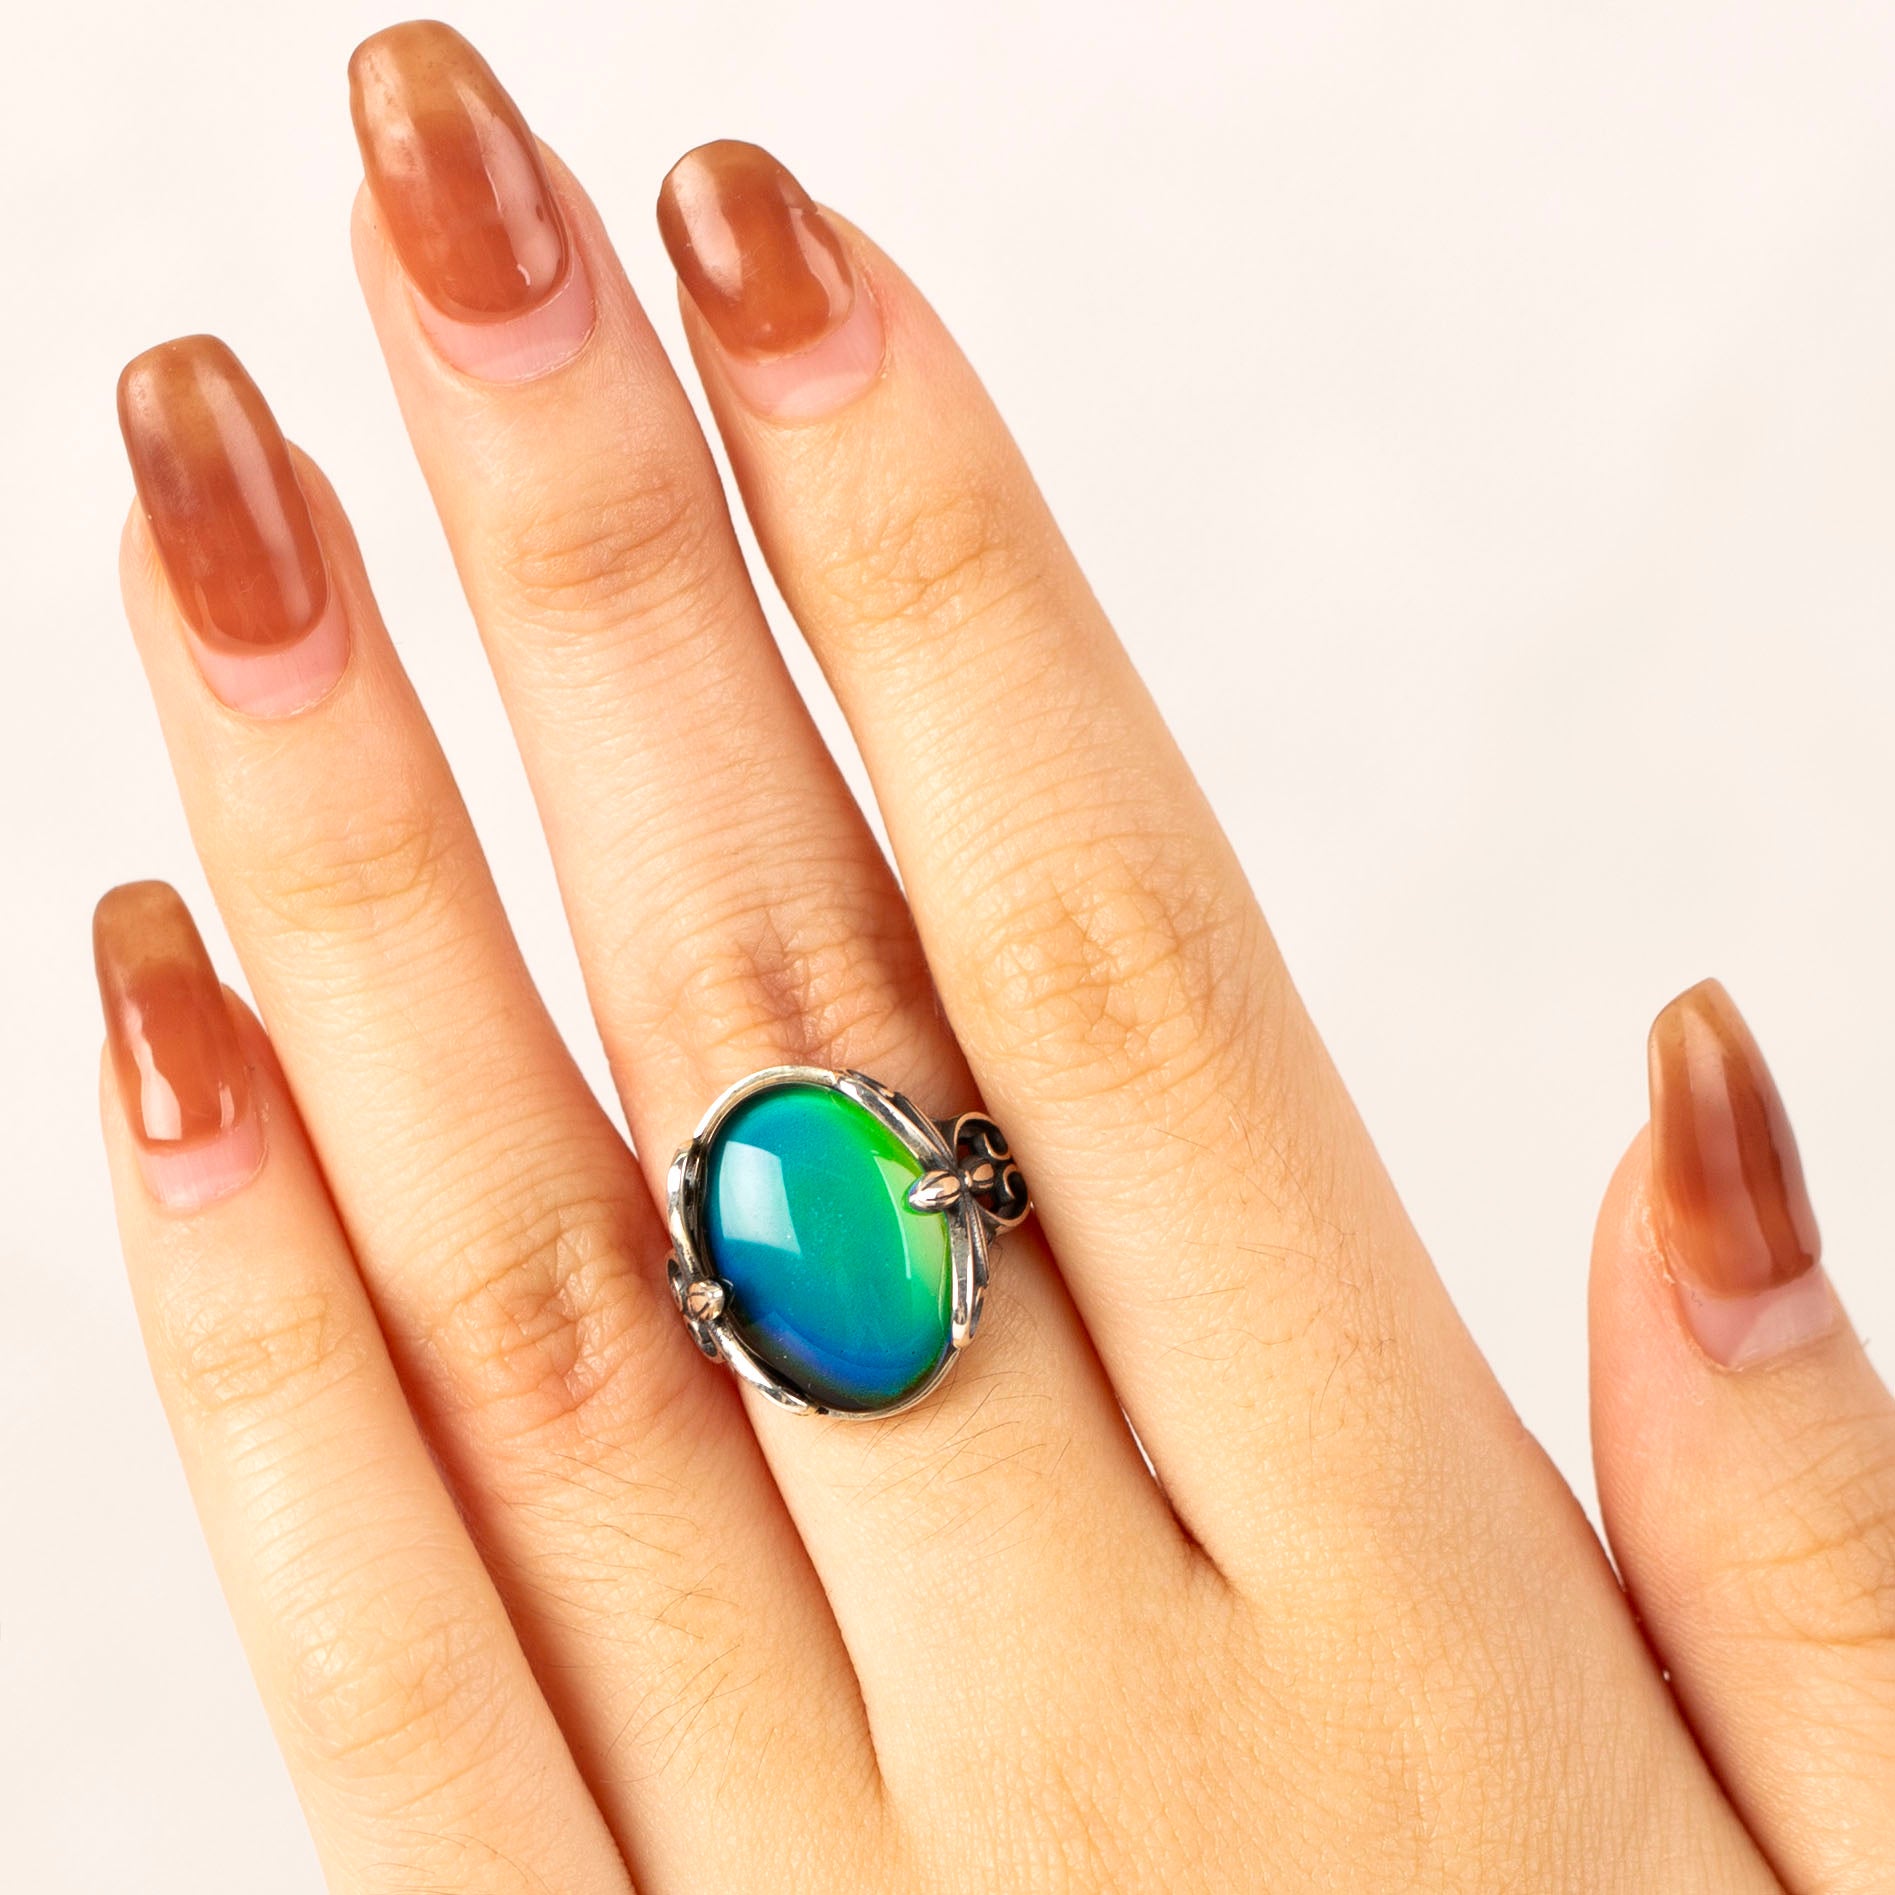 Amazon.com: Mood Ring for Grown-ups : Clothing, Shoes & Jewelry